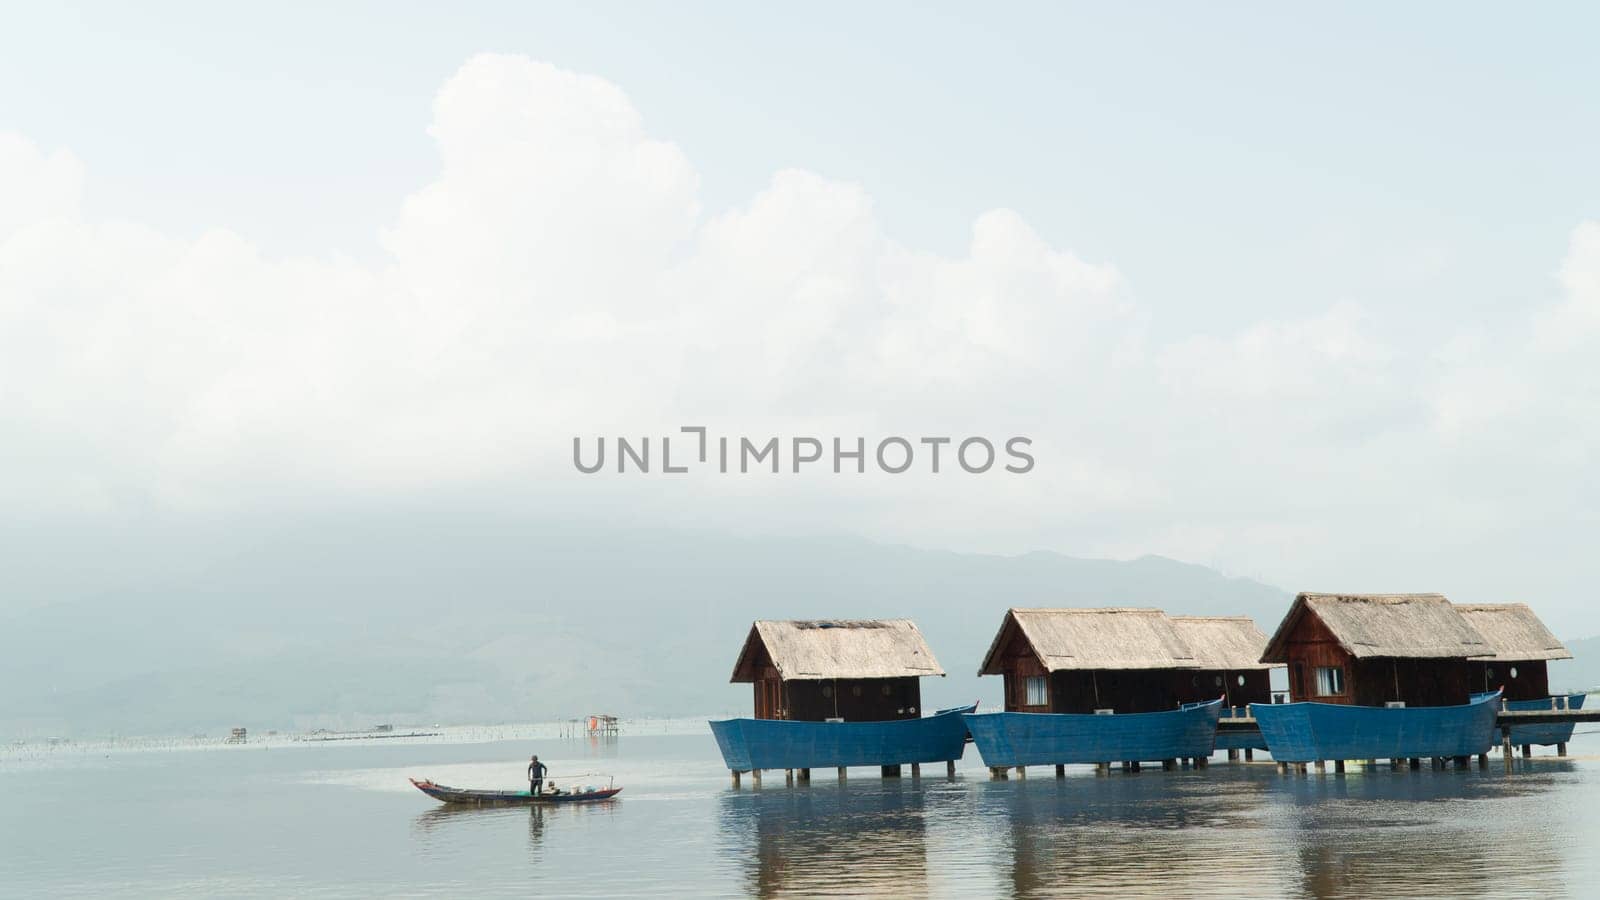 A fisherman in a boat sails away from the bungalow. High quality photo